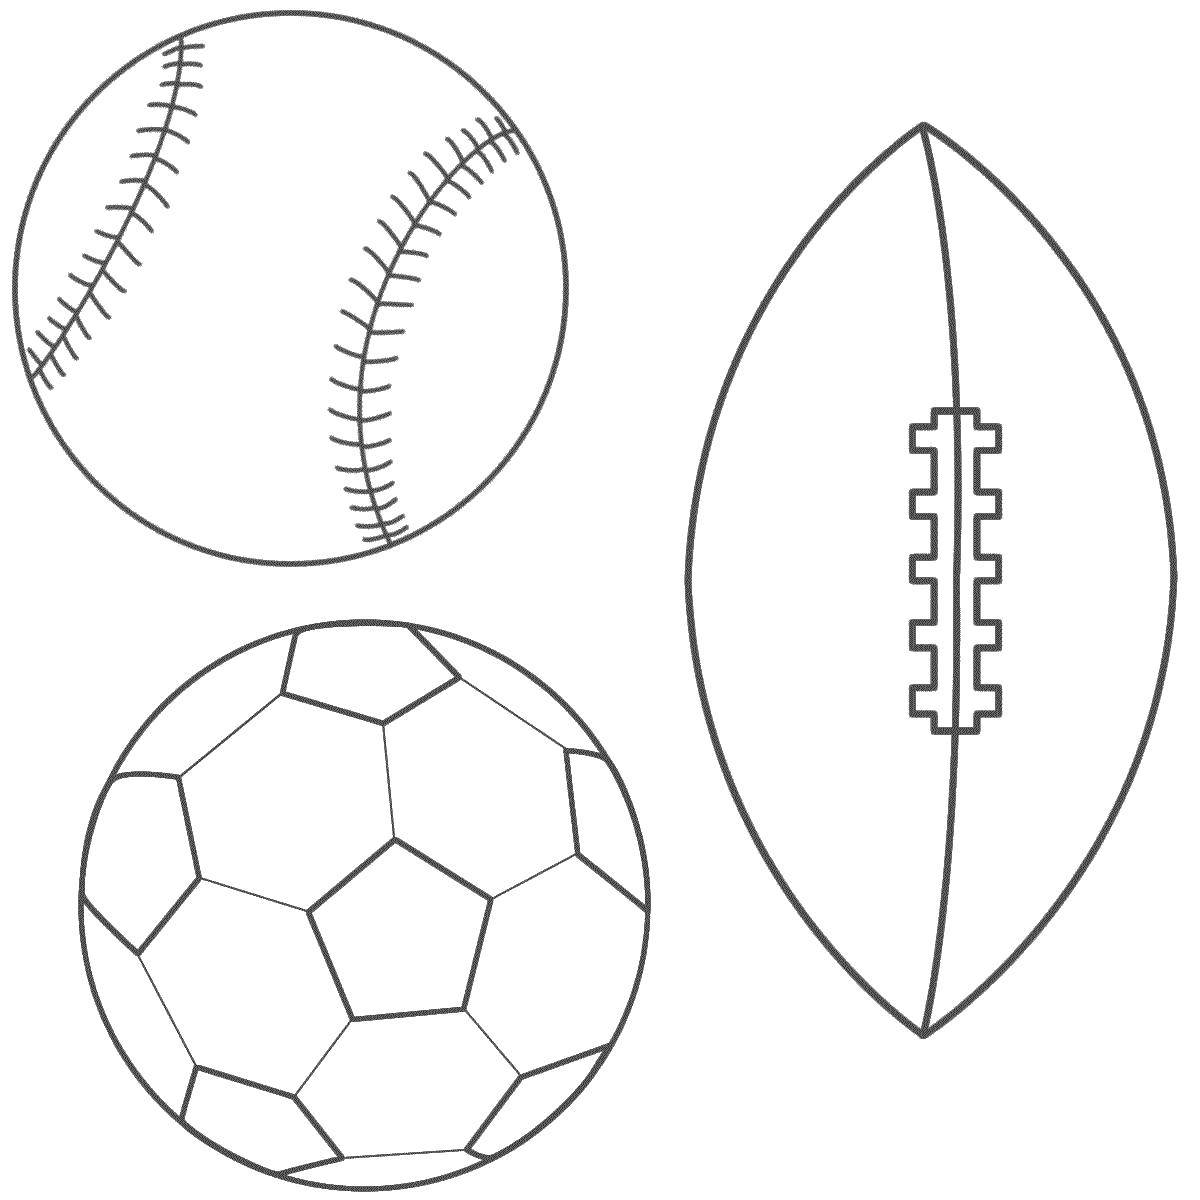 Coloring Balls for sports. Category sports. Tags:  ball, sports.